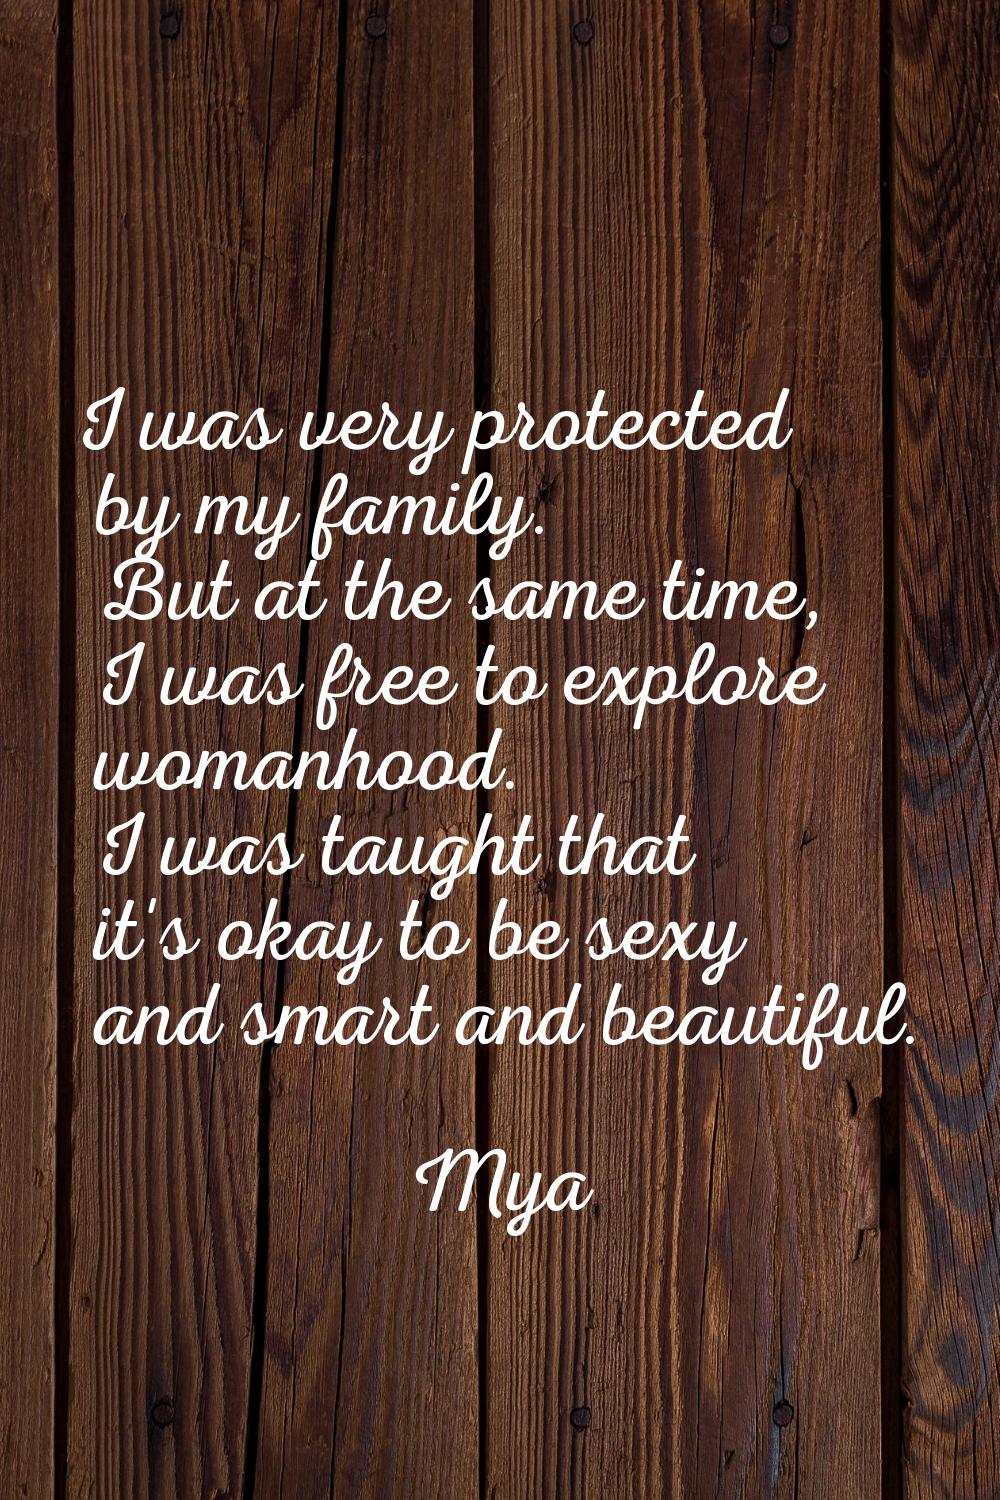 I was very protected by my family. But at the same time, I was free to explore womanhood. I was tau